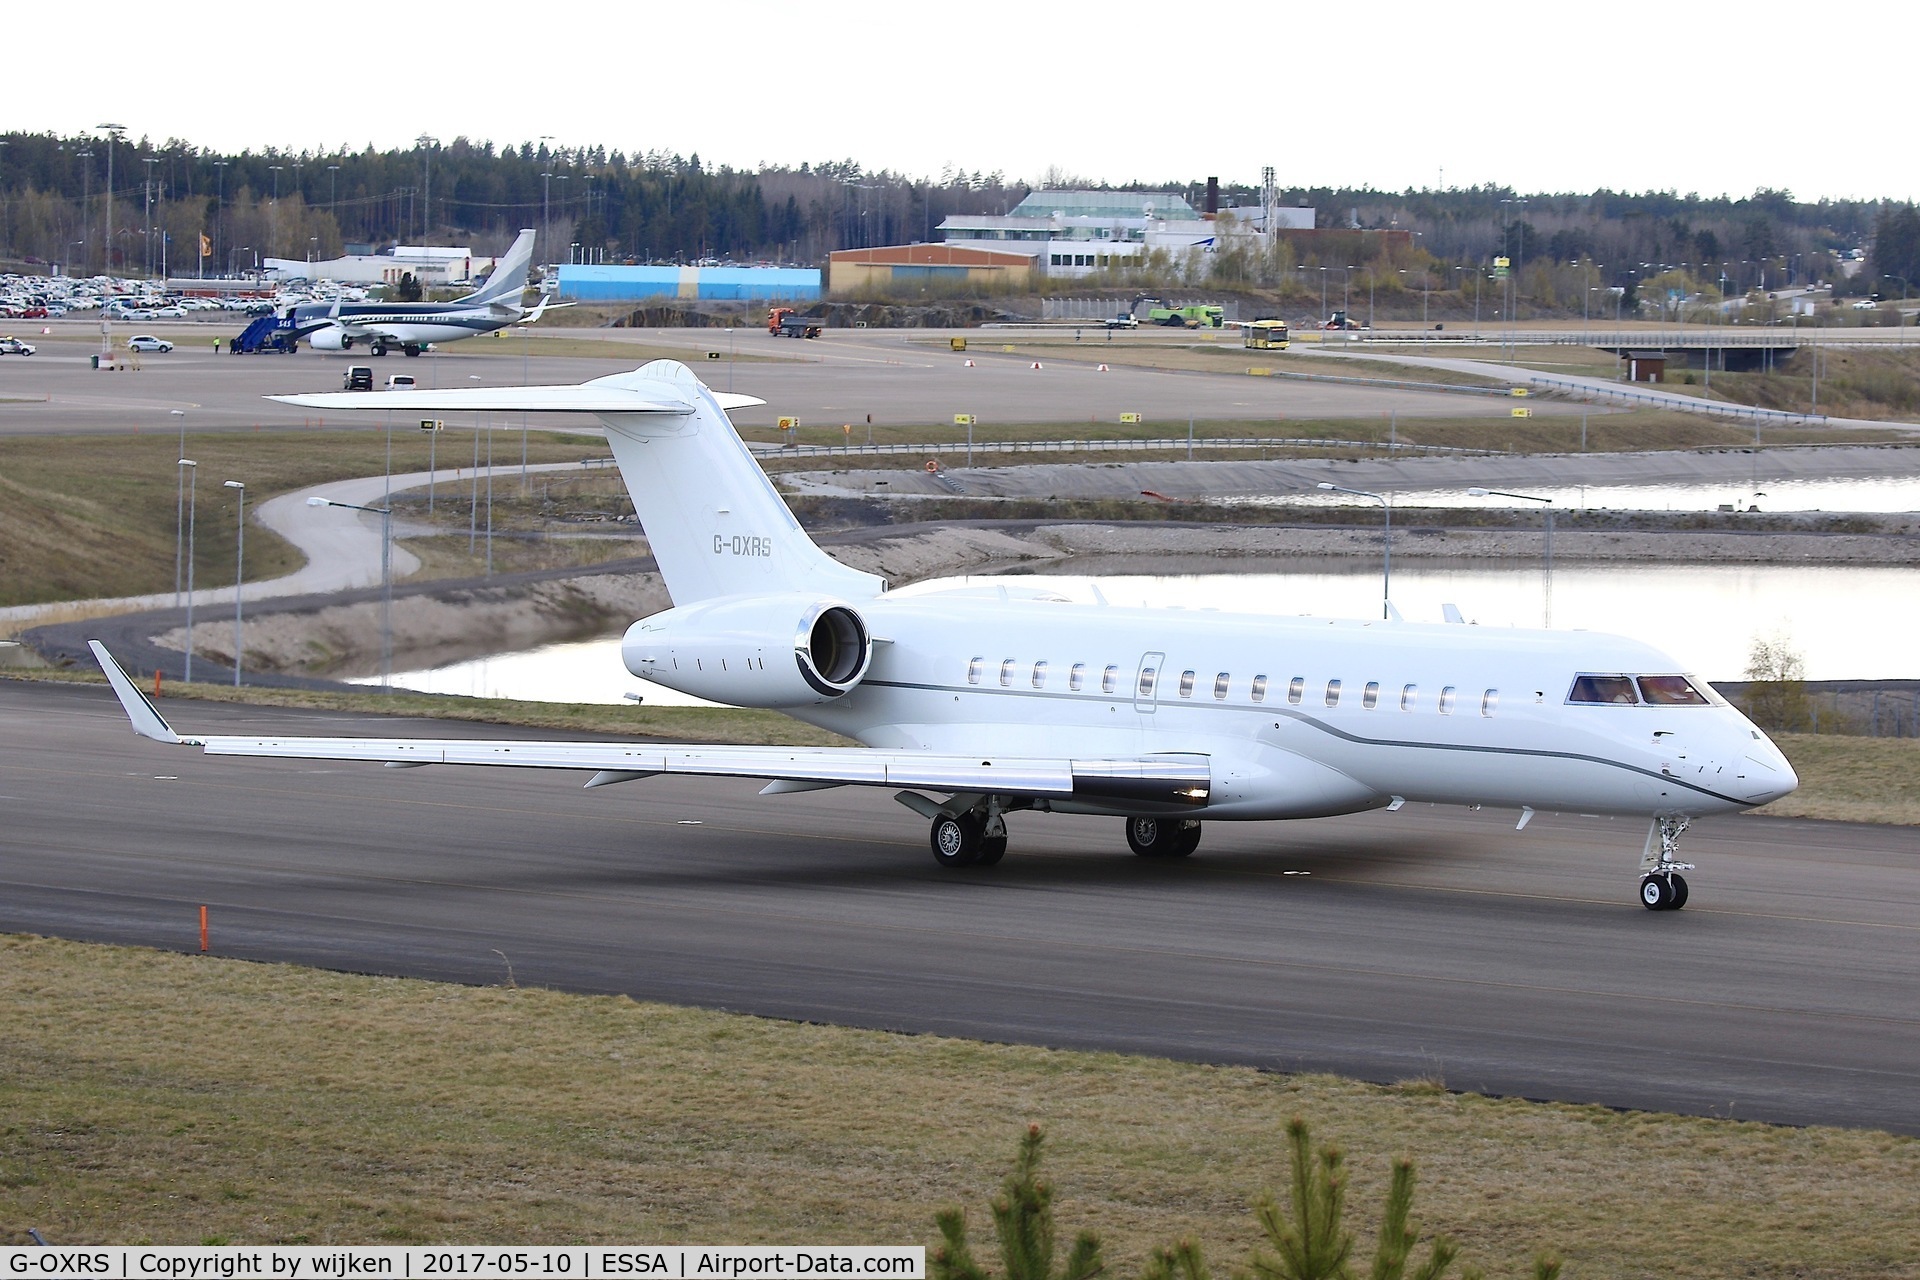 G-OXRS, 2009 Bombardier BD-700-1A10 Global Express C/N 9351, Taxiway W